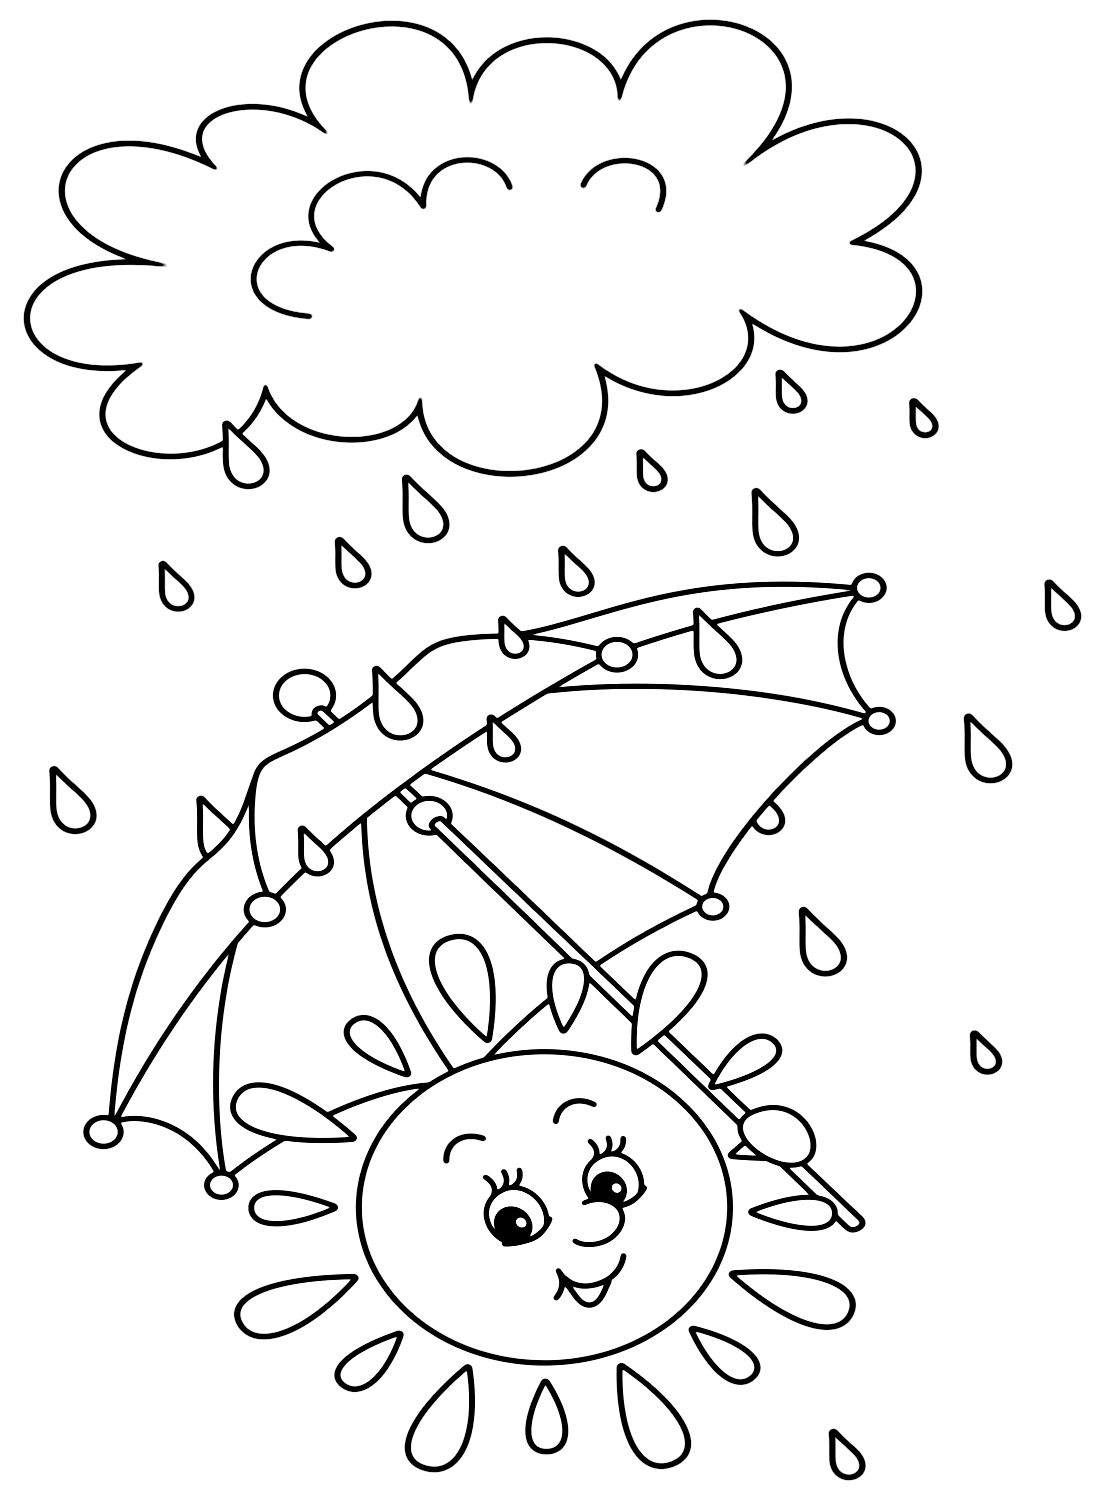 The Sun Avoids the Rain Coloring Pages